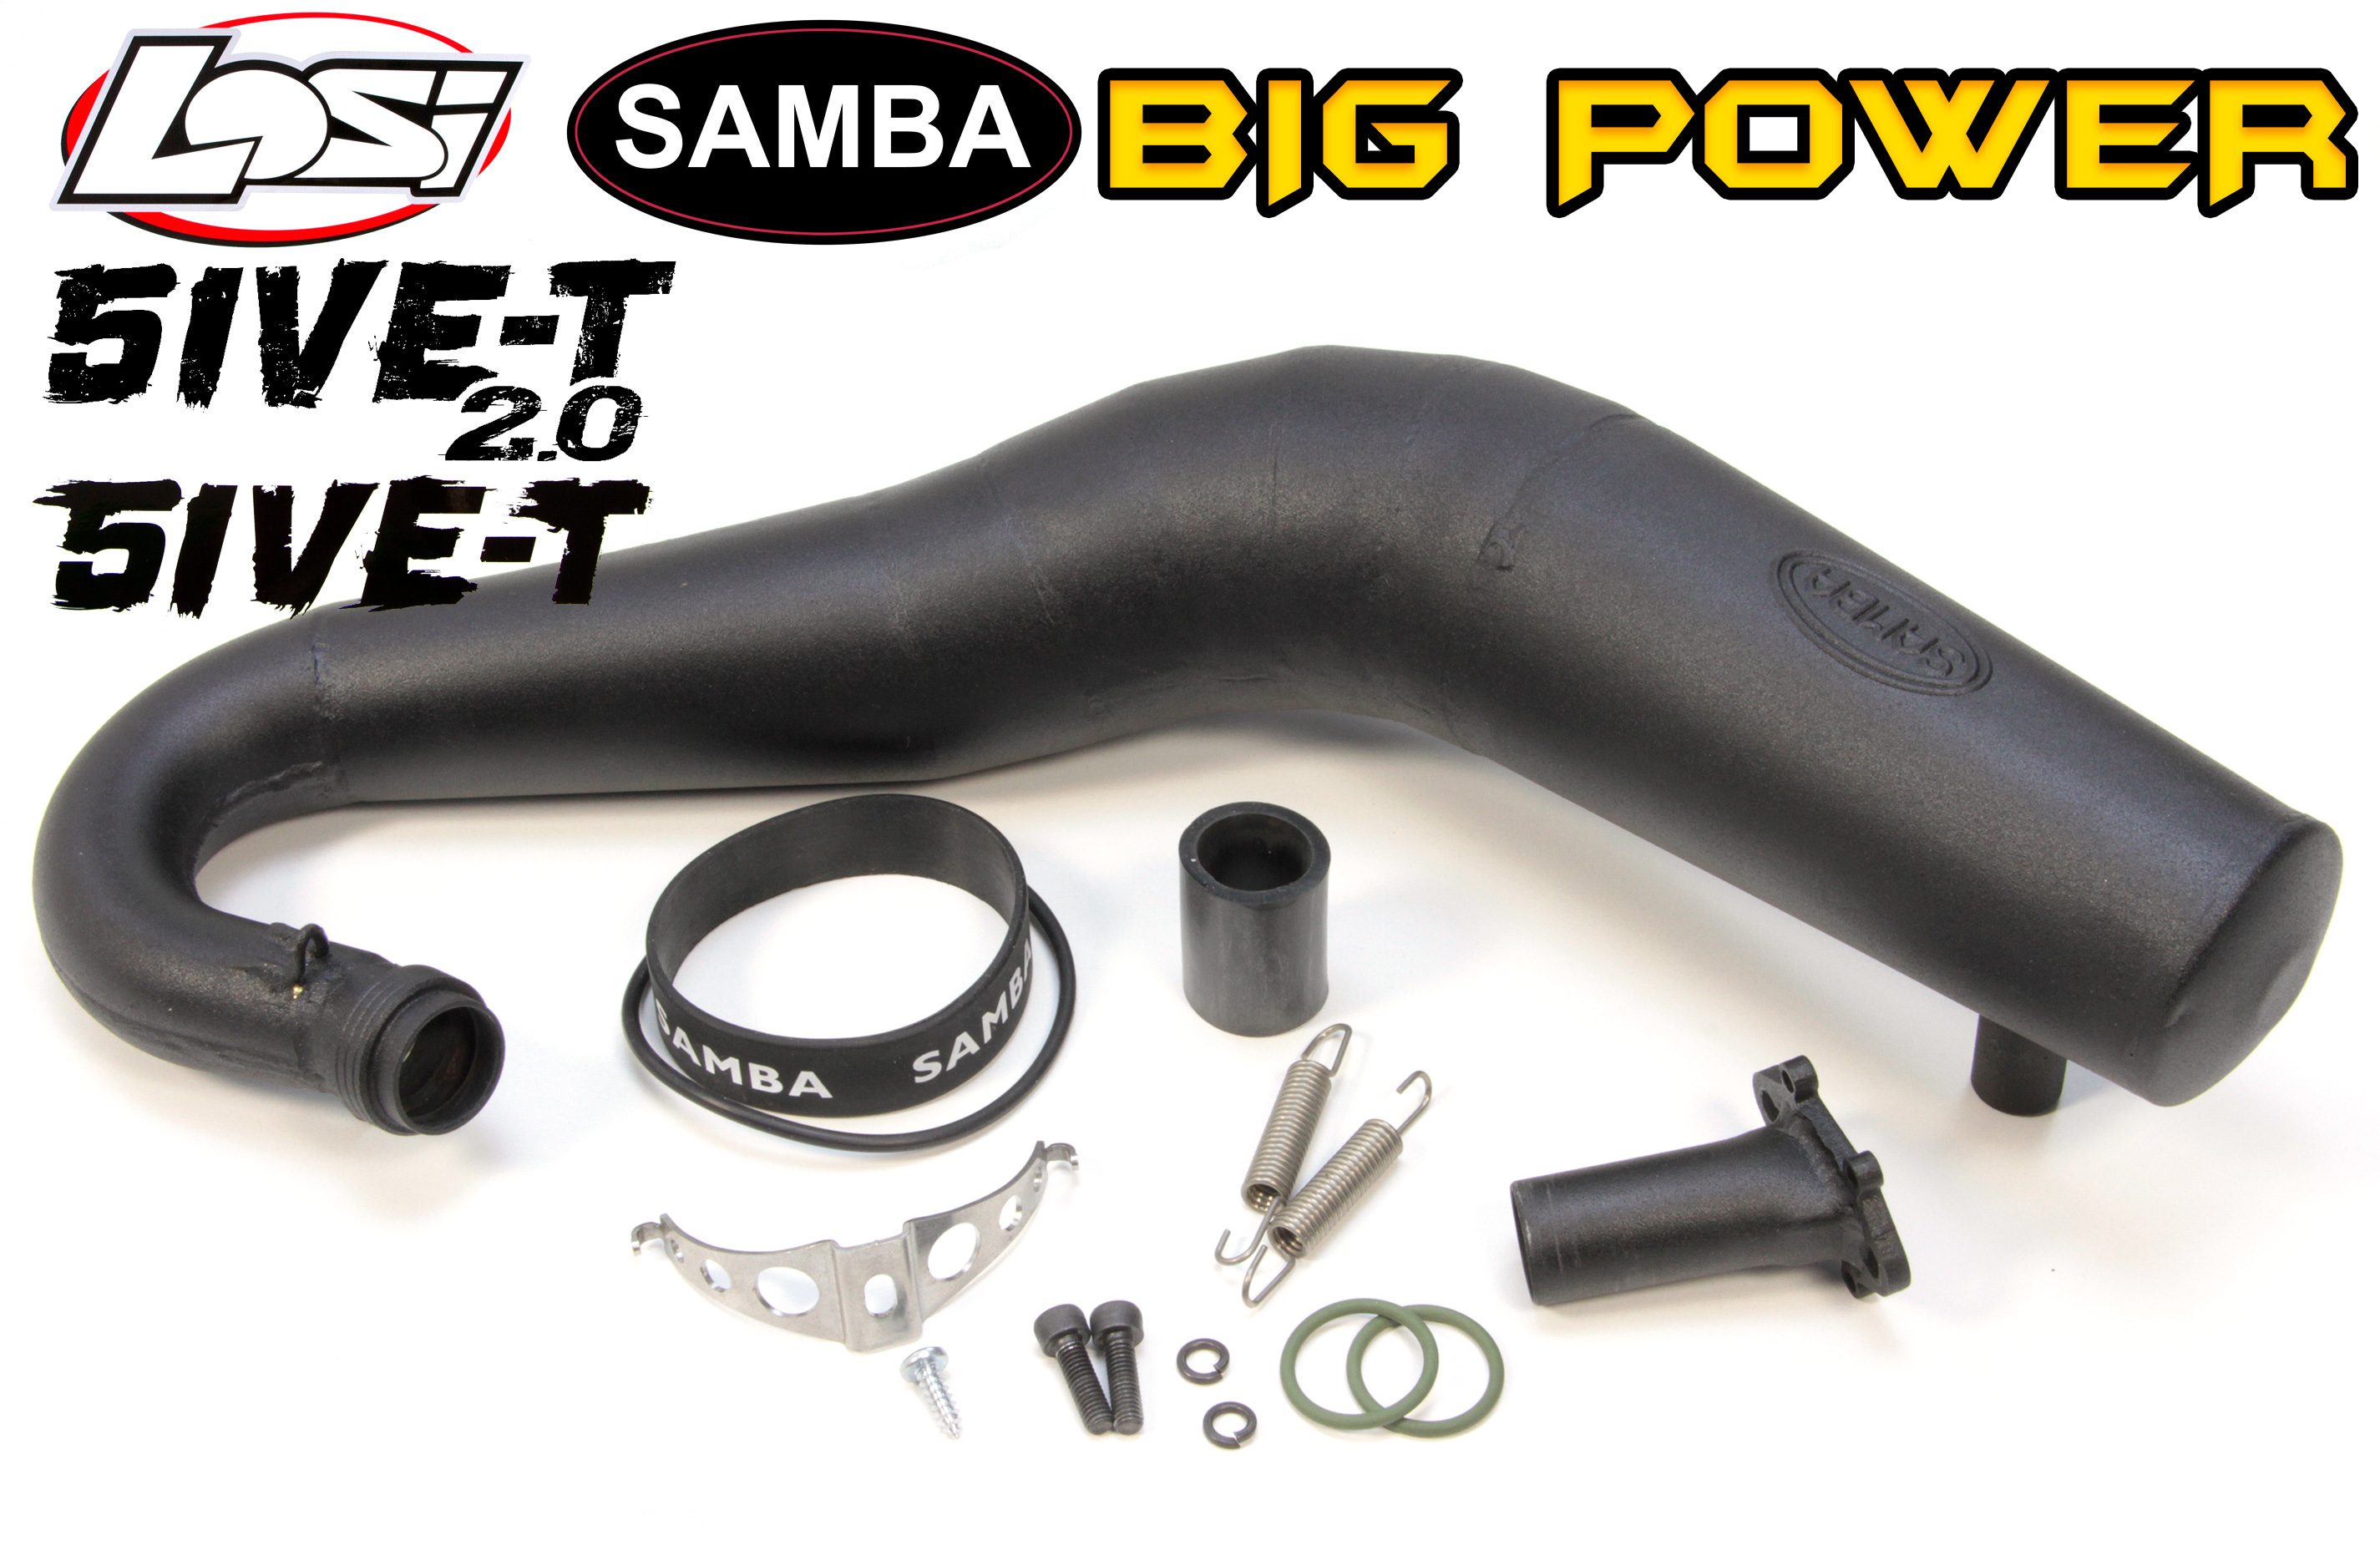 4822 Samba BIG POWER tuned pipe for Losi 5ive-T/2.0 up to 32 cm³